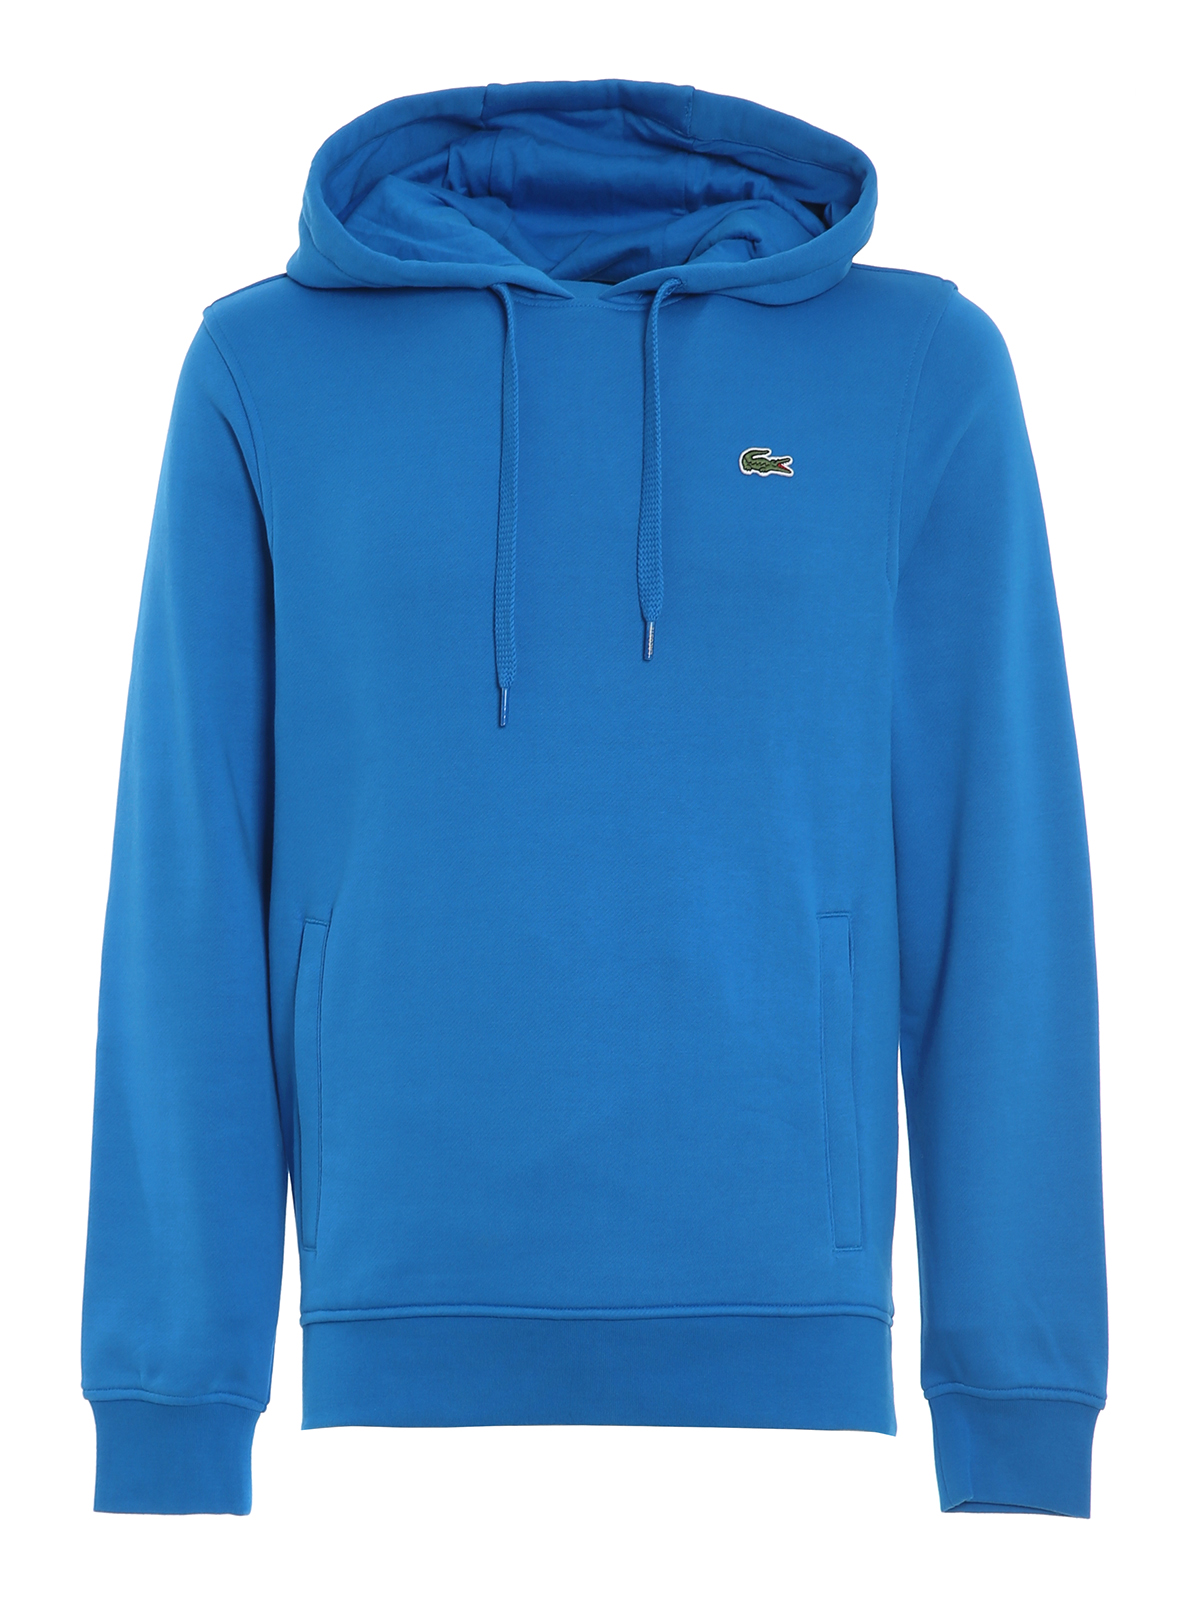 Lacoste - Cotton blend hoodie - سویشرت 